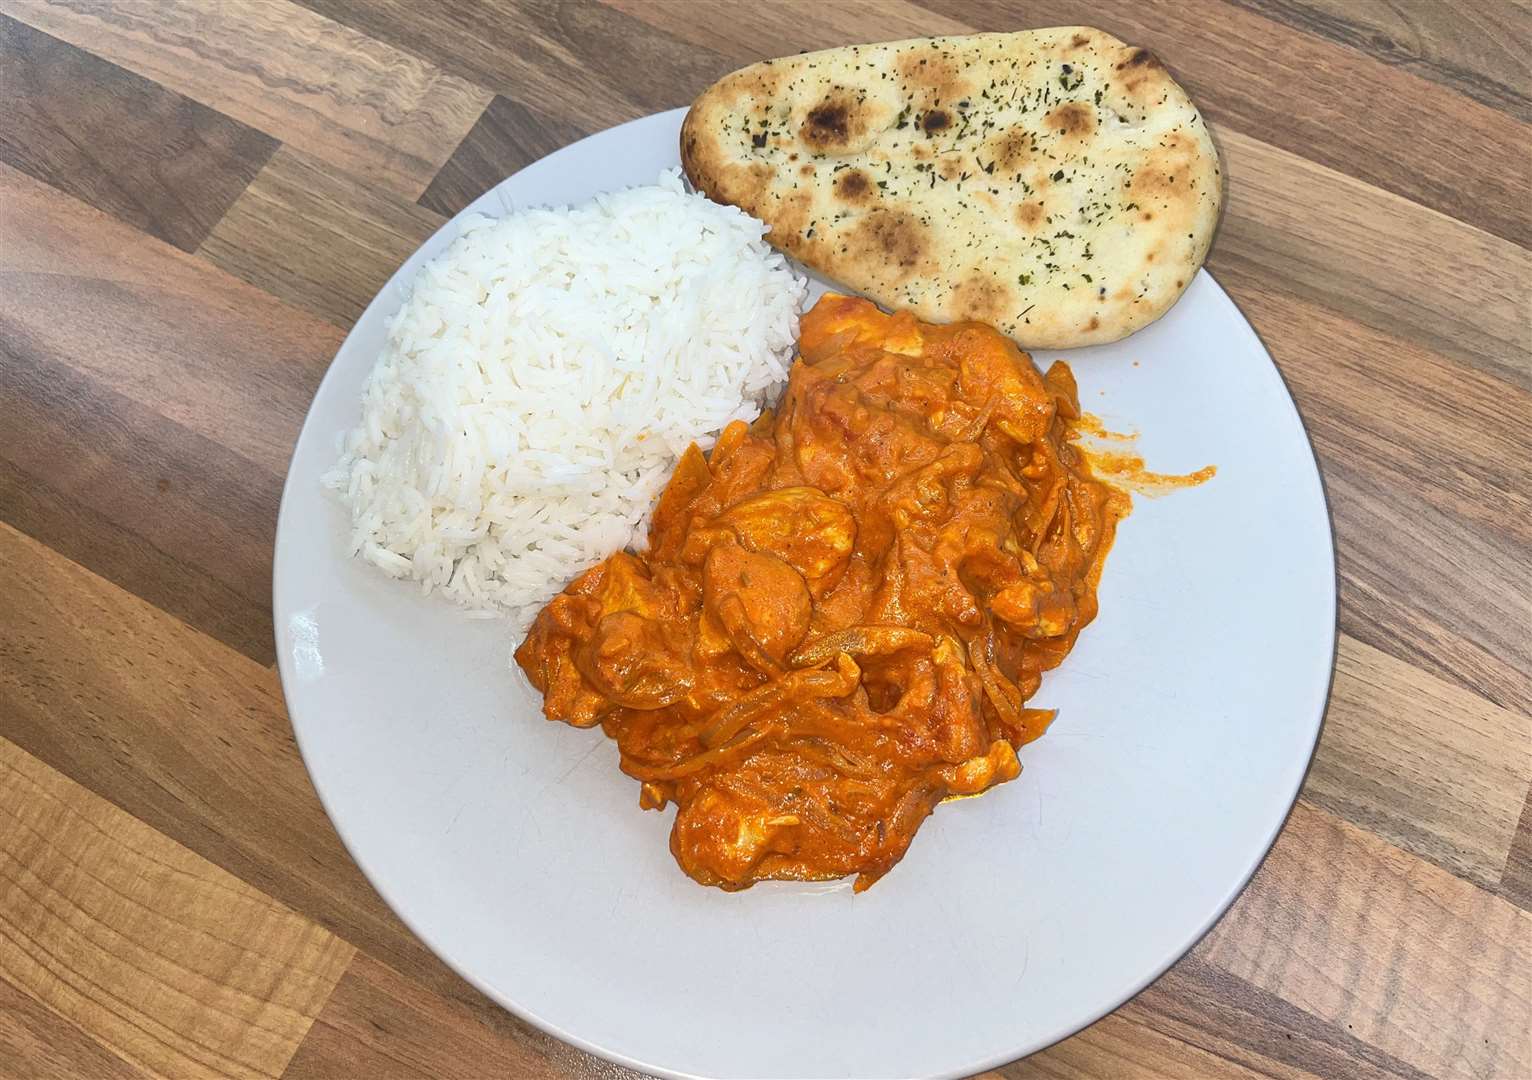 This homemade chicken tikka masala with basmati rice and naan bread certainly looked the part and was packed with flavour